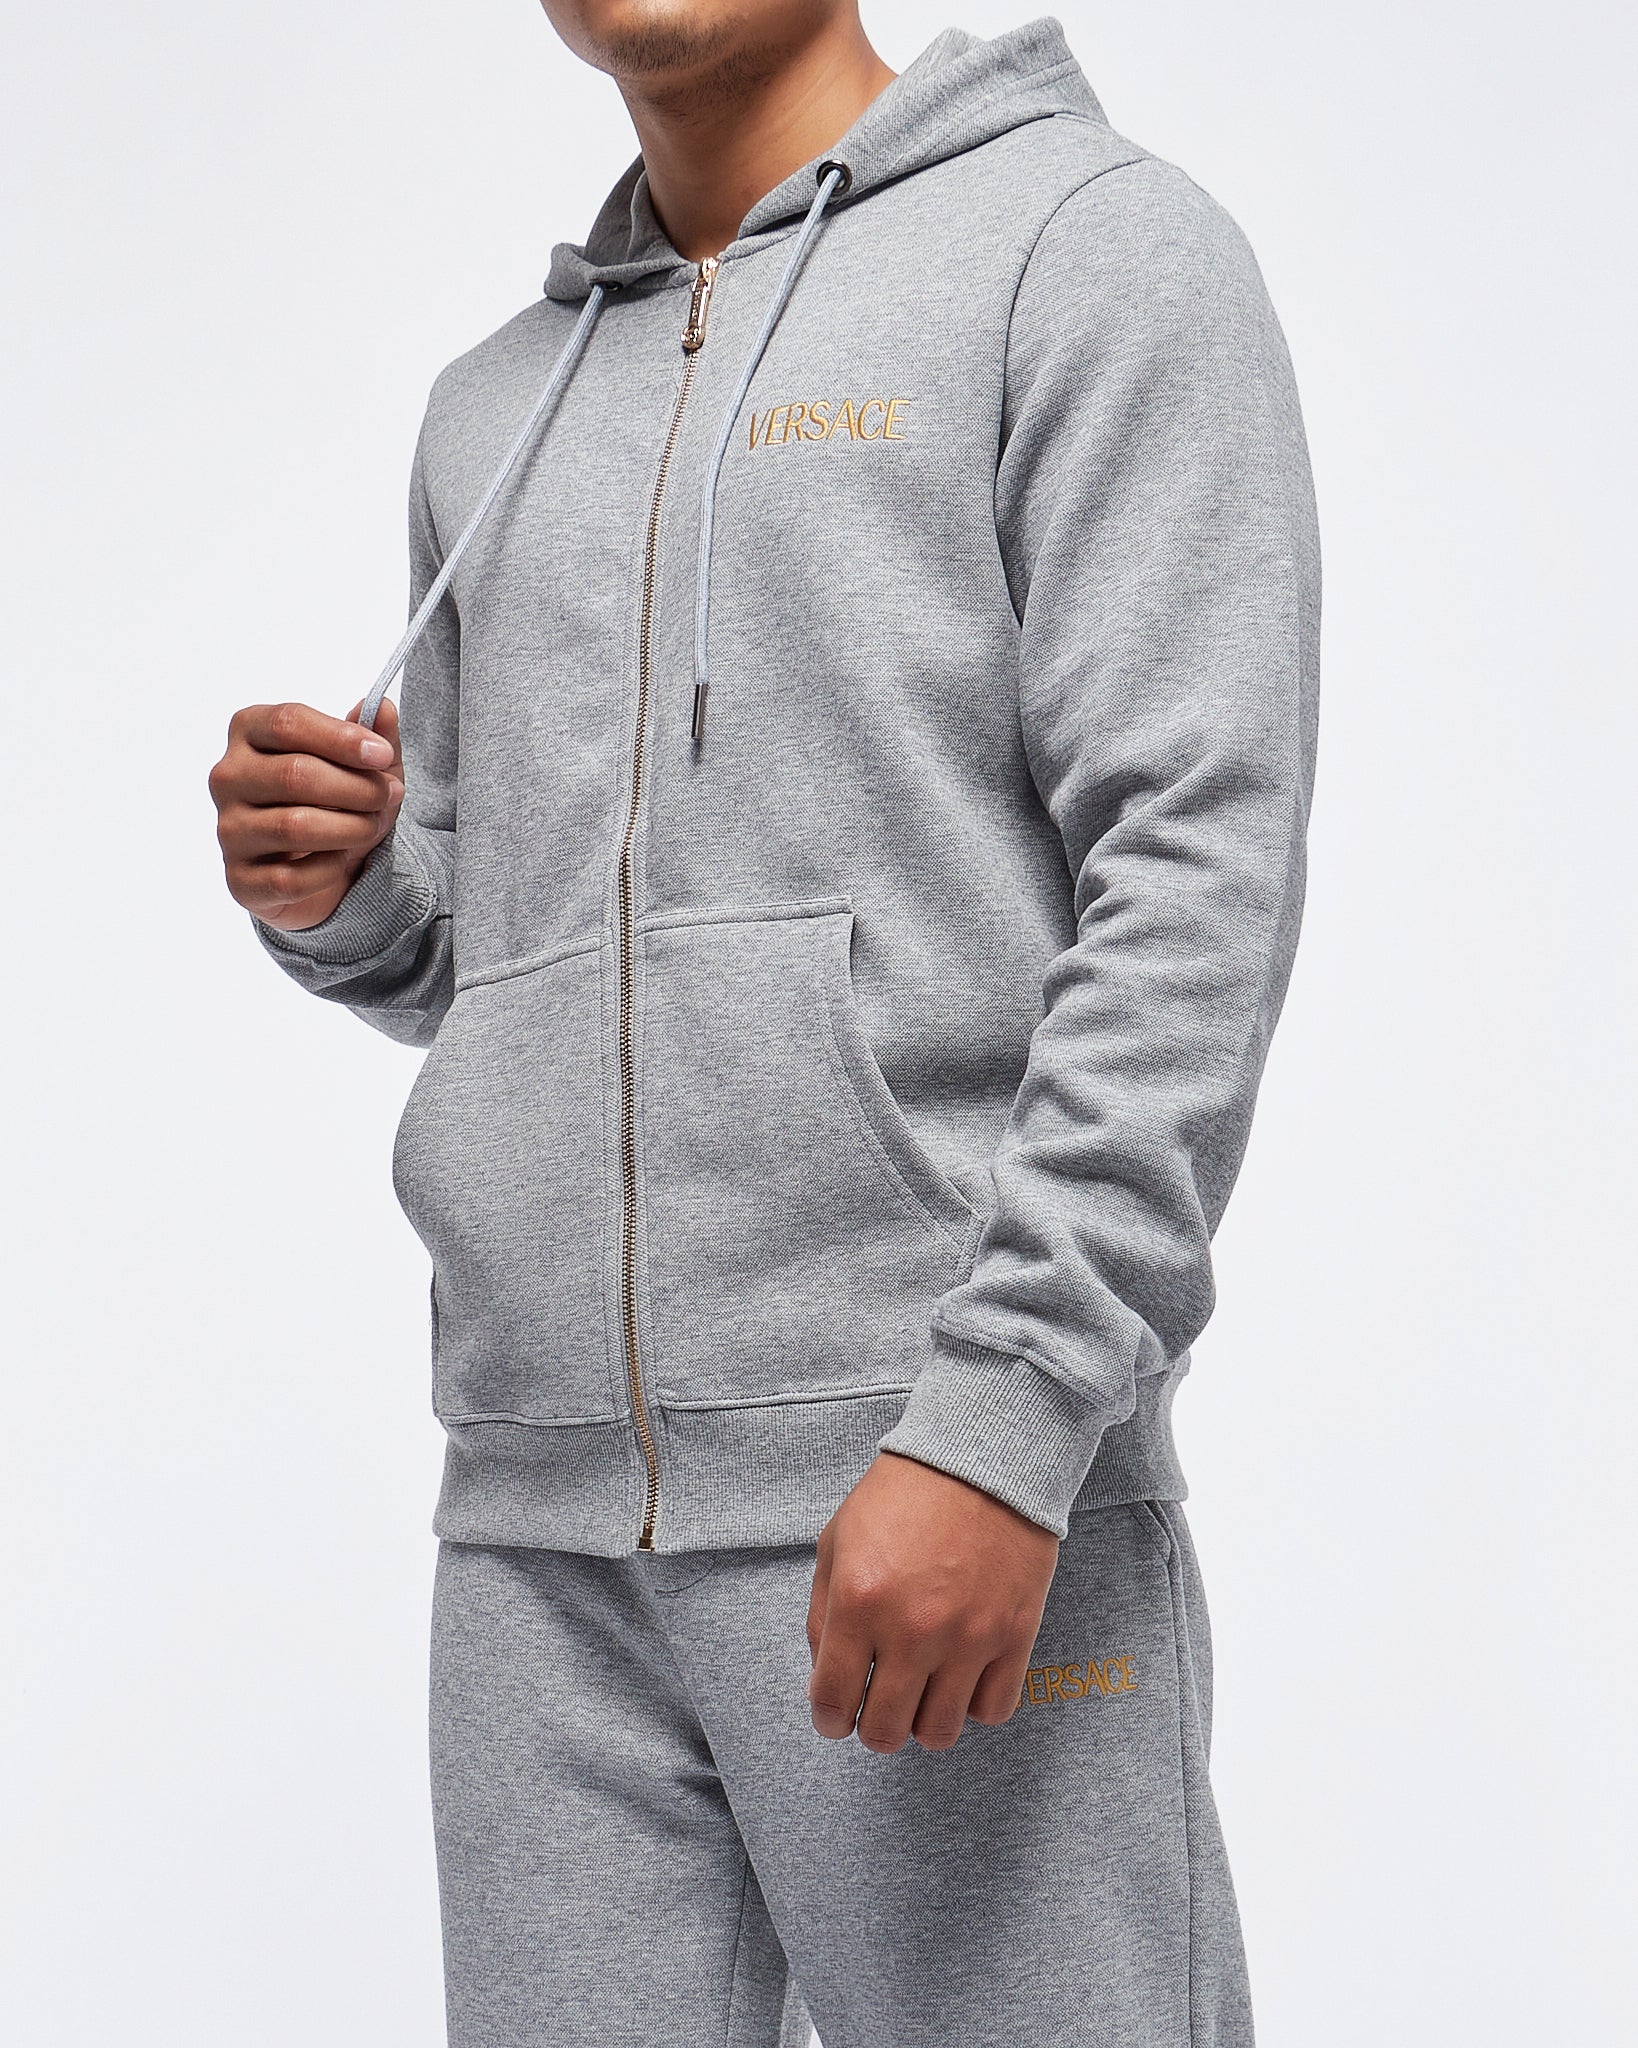 MOI OUTFIT-Medusa Logo Embroidered Back Men Hoodie 38.90